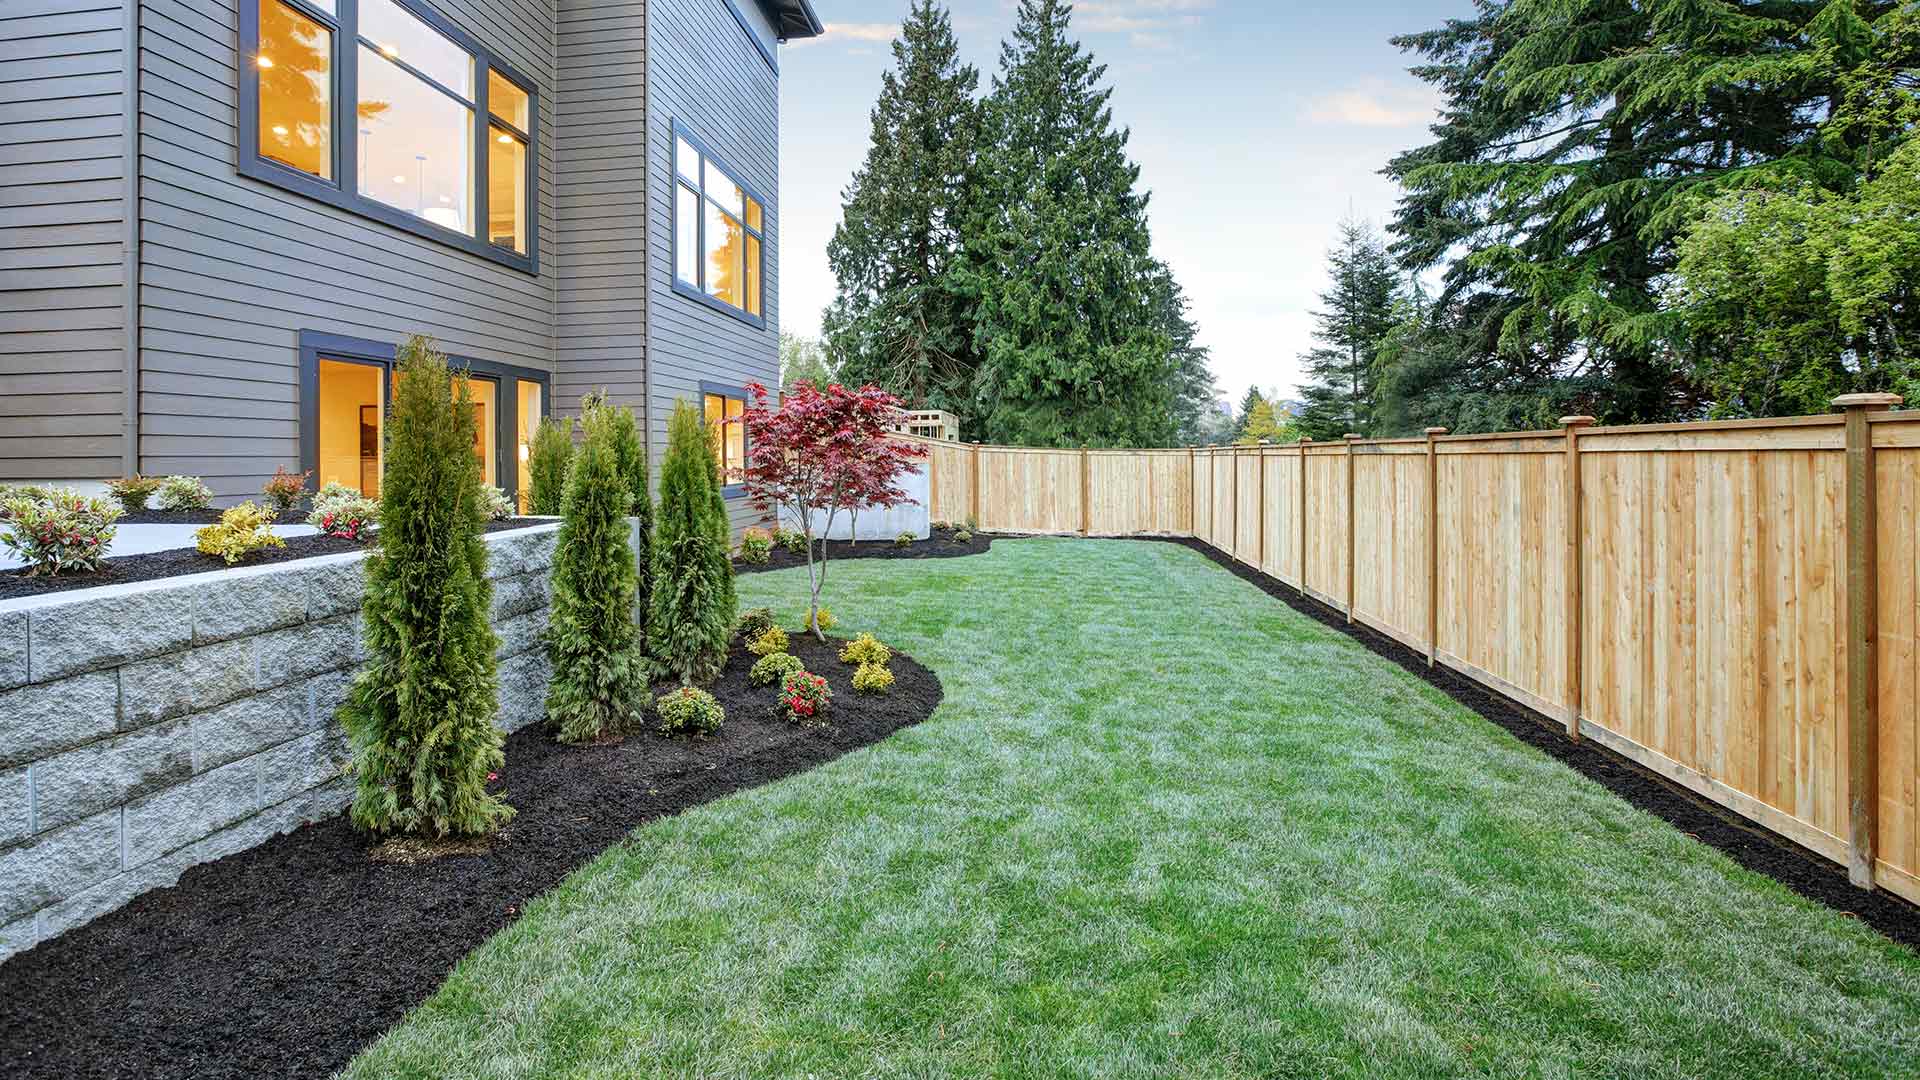 A stunning landscape bed and healthy green backyard lawn in Ashtabula, OH.